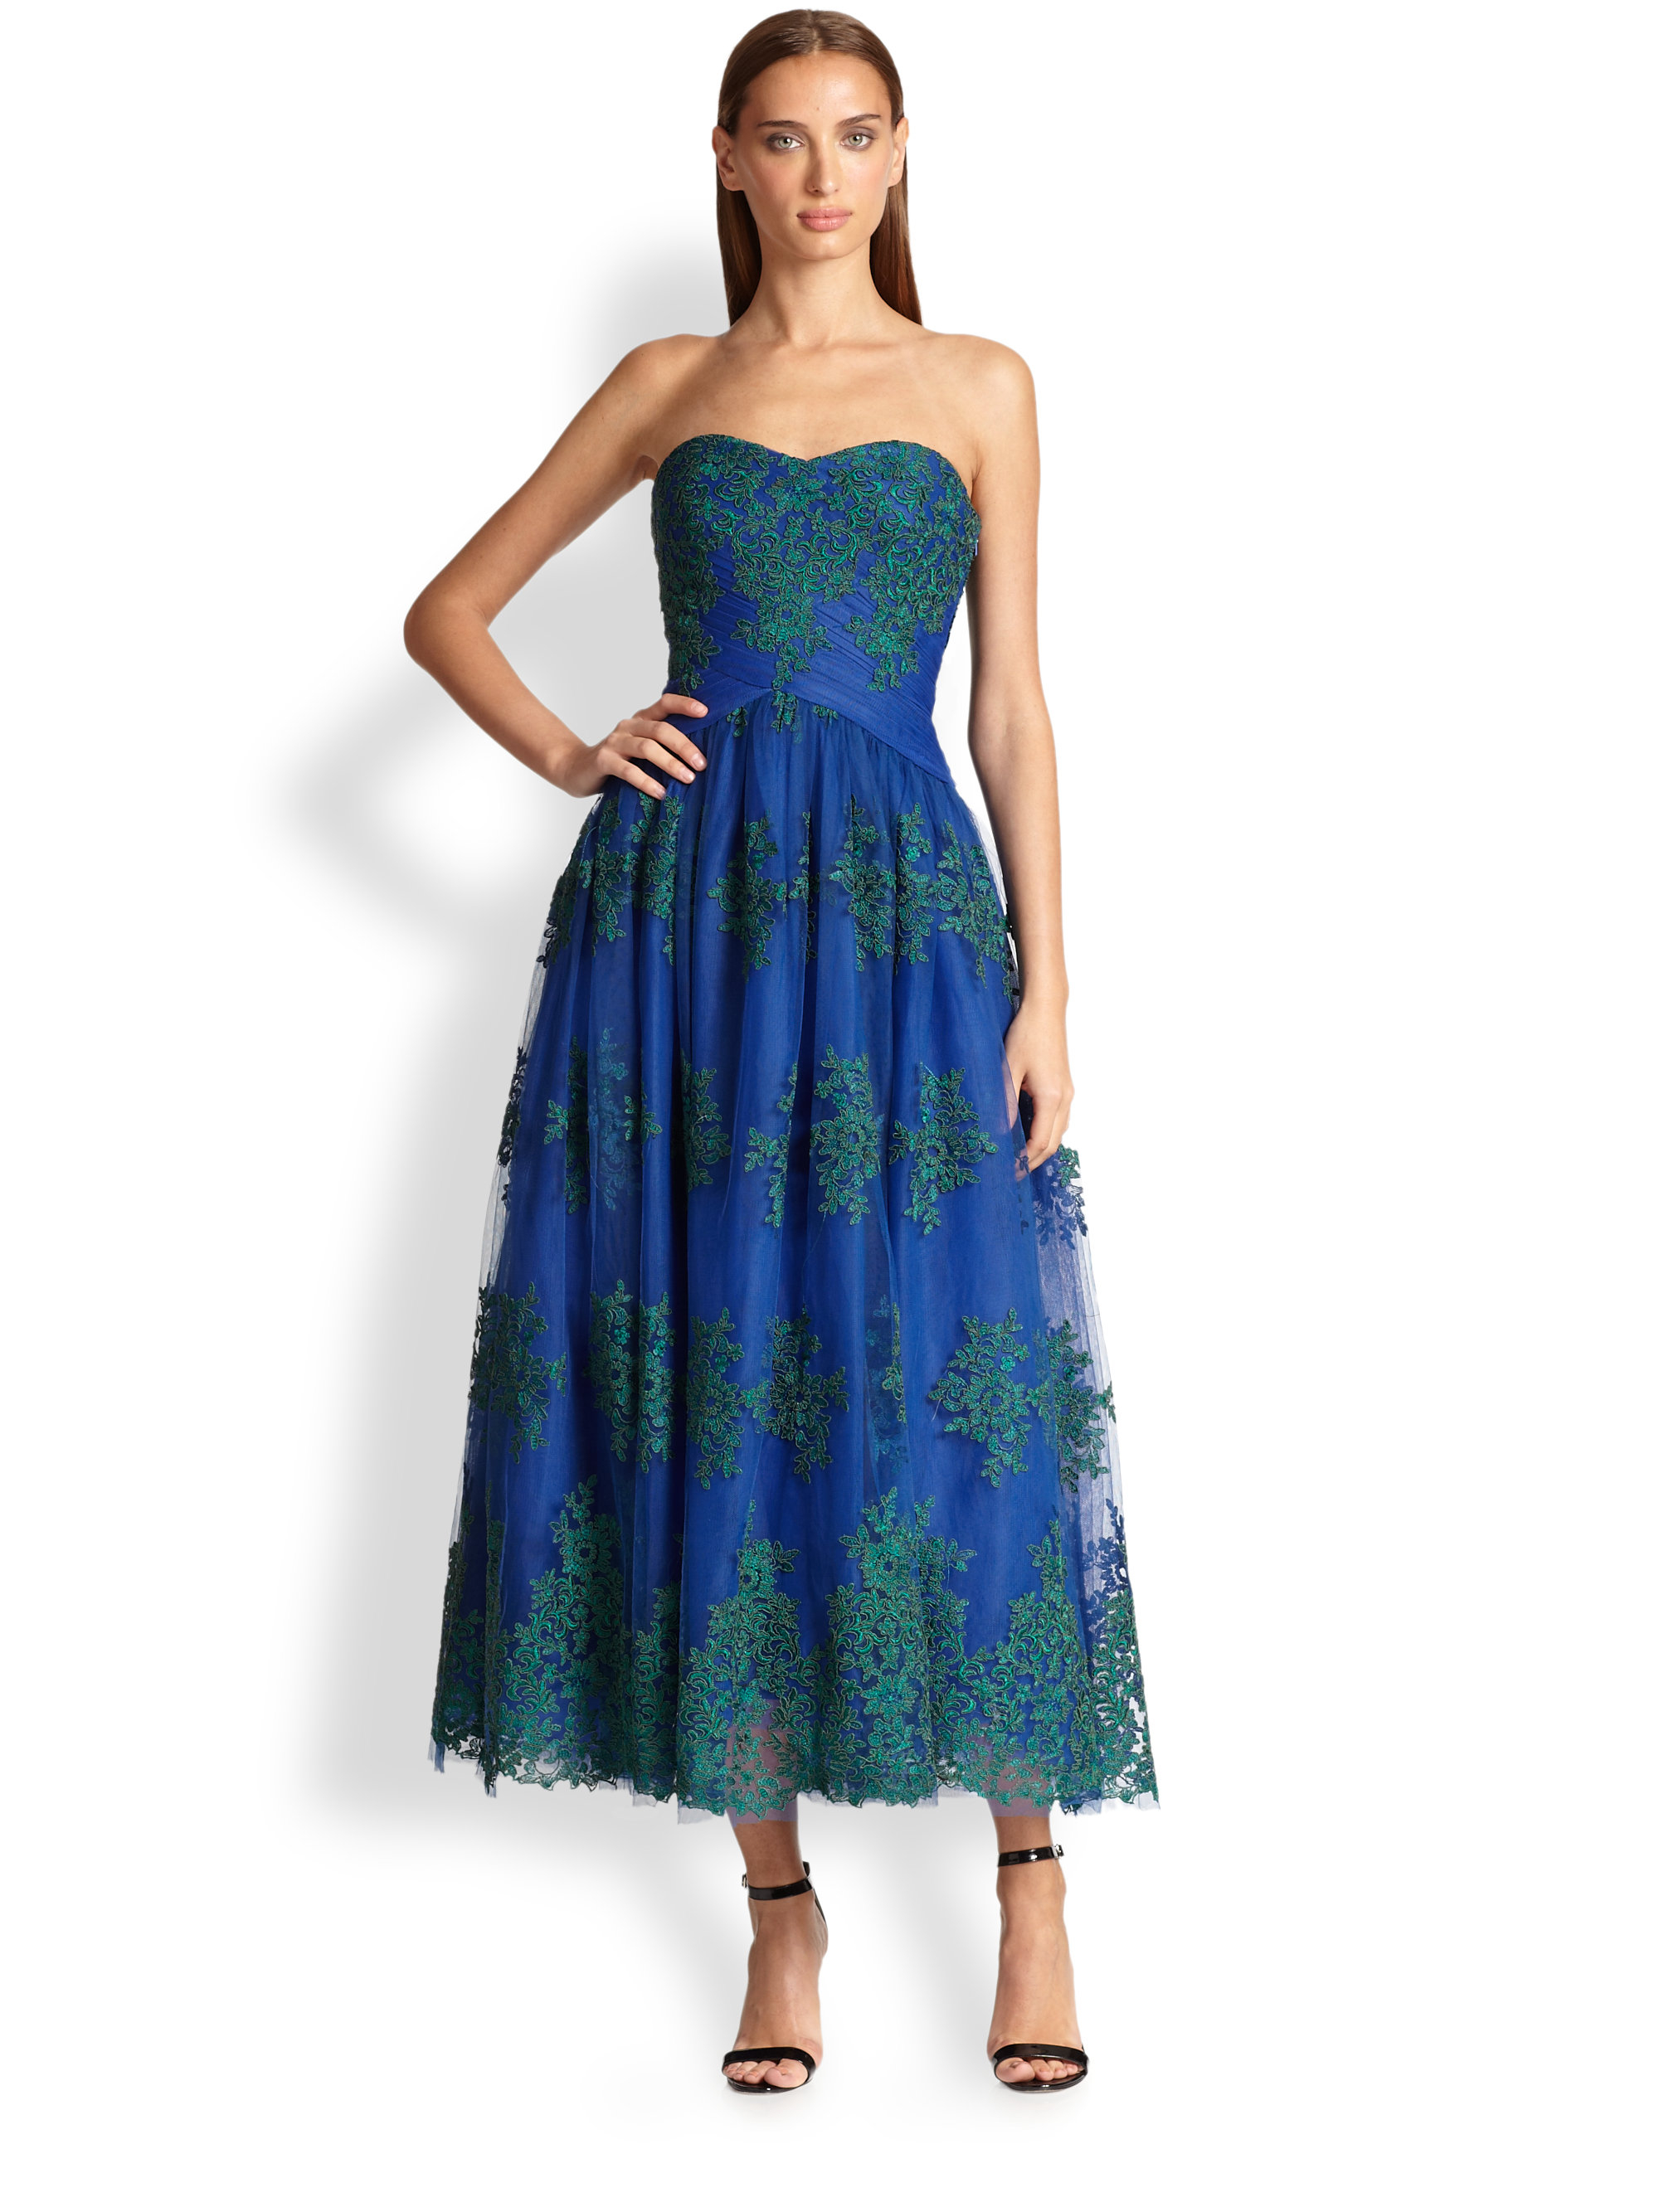 Lyst - Ml Monique Lhuillier Strapless Embroidered Tea-length Cocktail ...